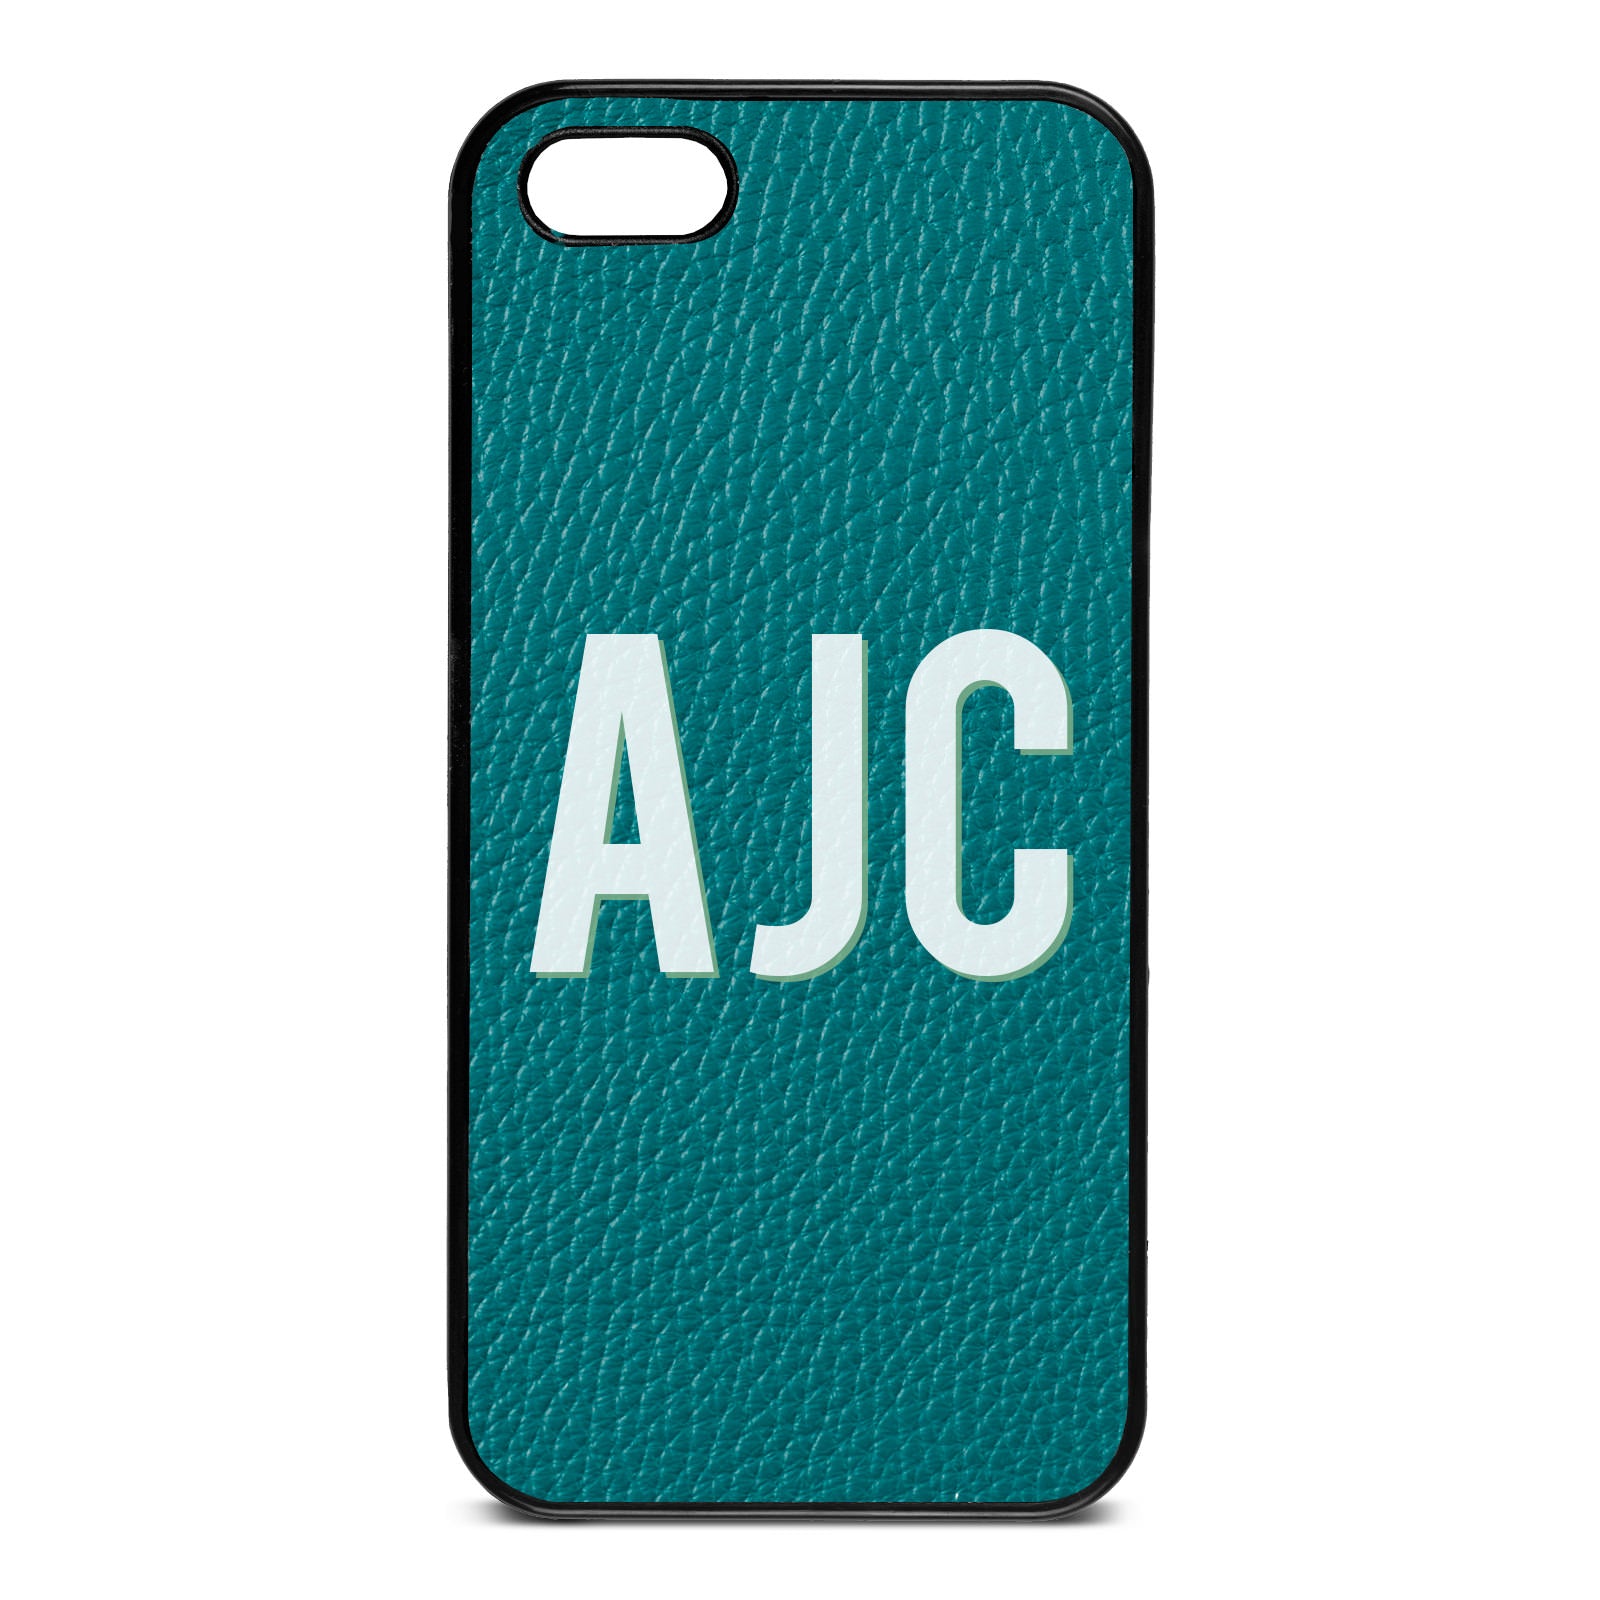 iPhone 5 Pebble Green Leather iPhone Case